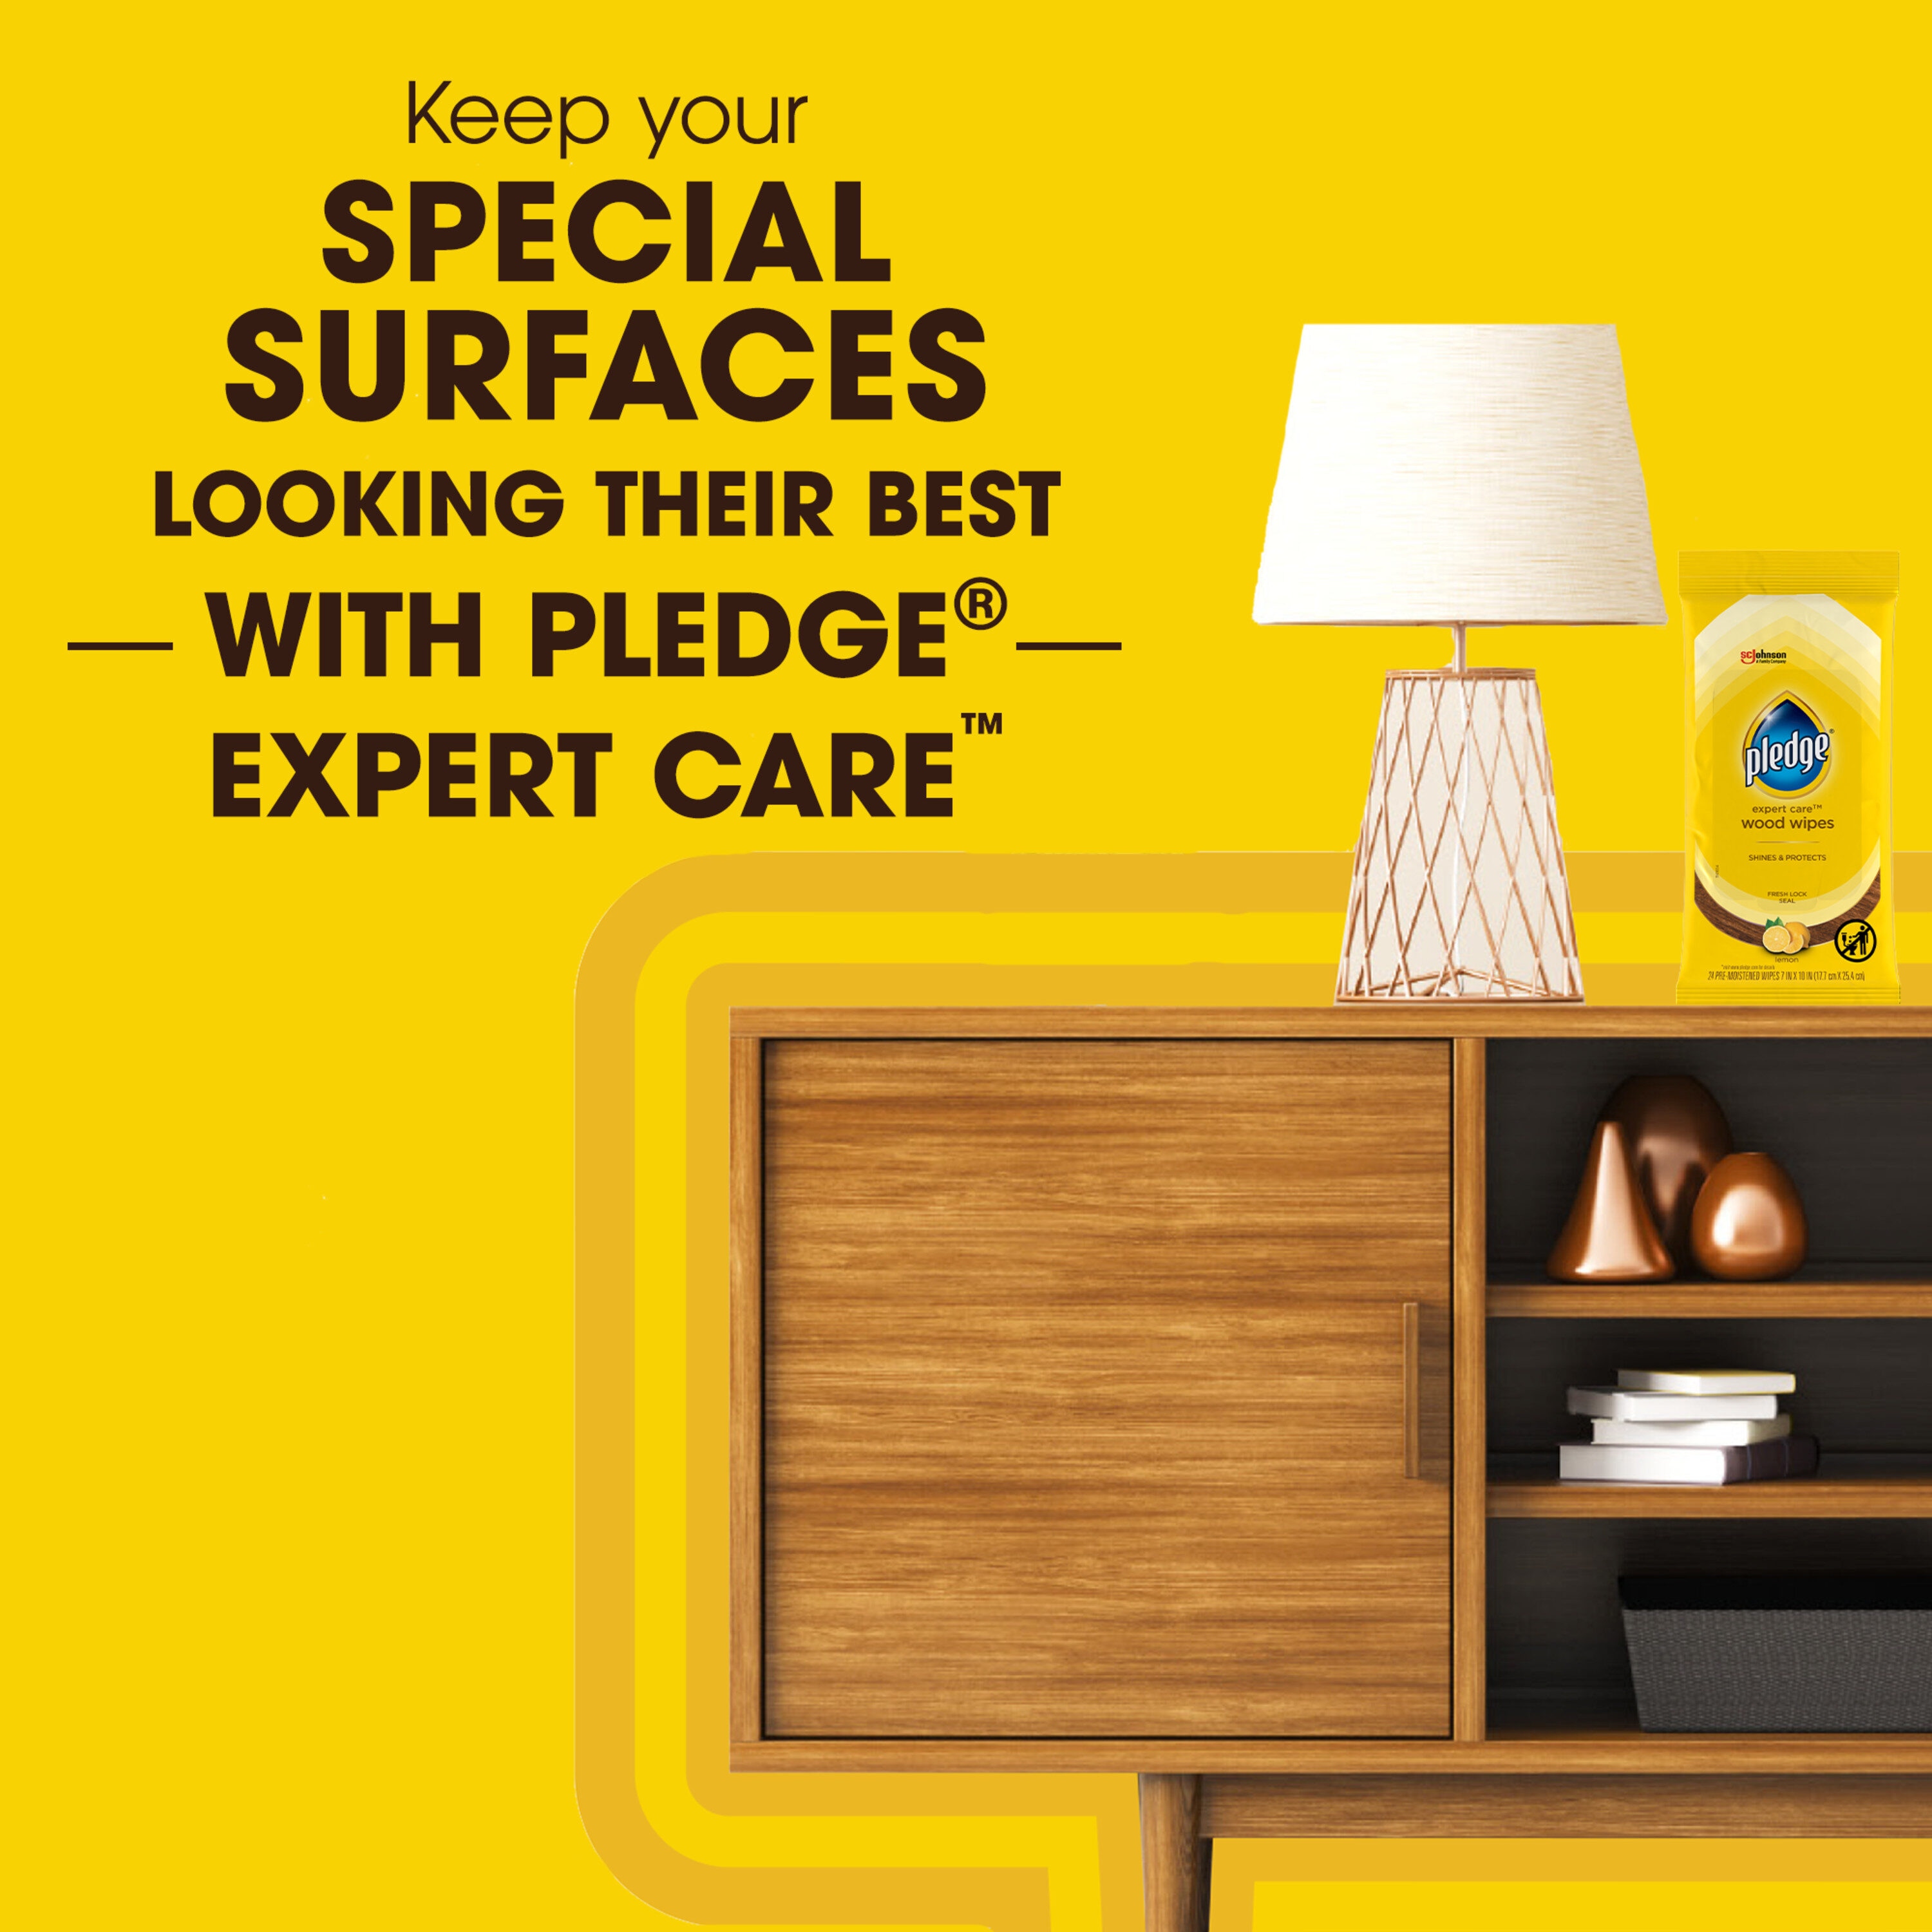 Pledge Multi-Surface Furniture Polish Wipes, Works on Wood, Granite, and  Leather, Cleans and Protects, Lemon (24 Total Wipes), Packaging may vary